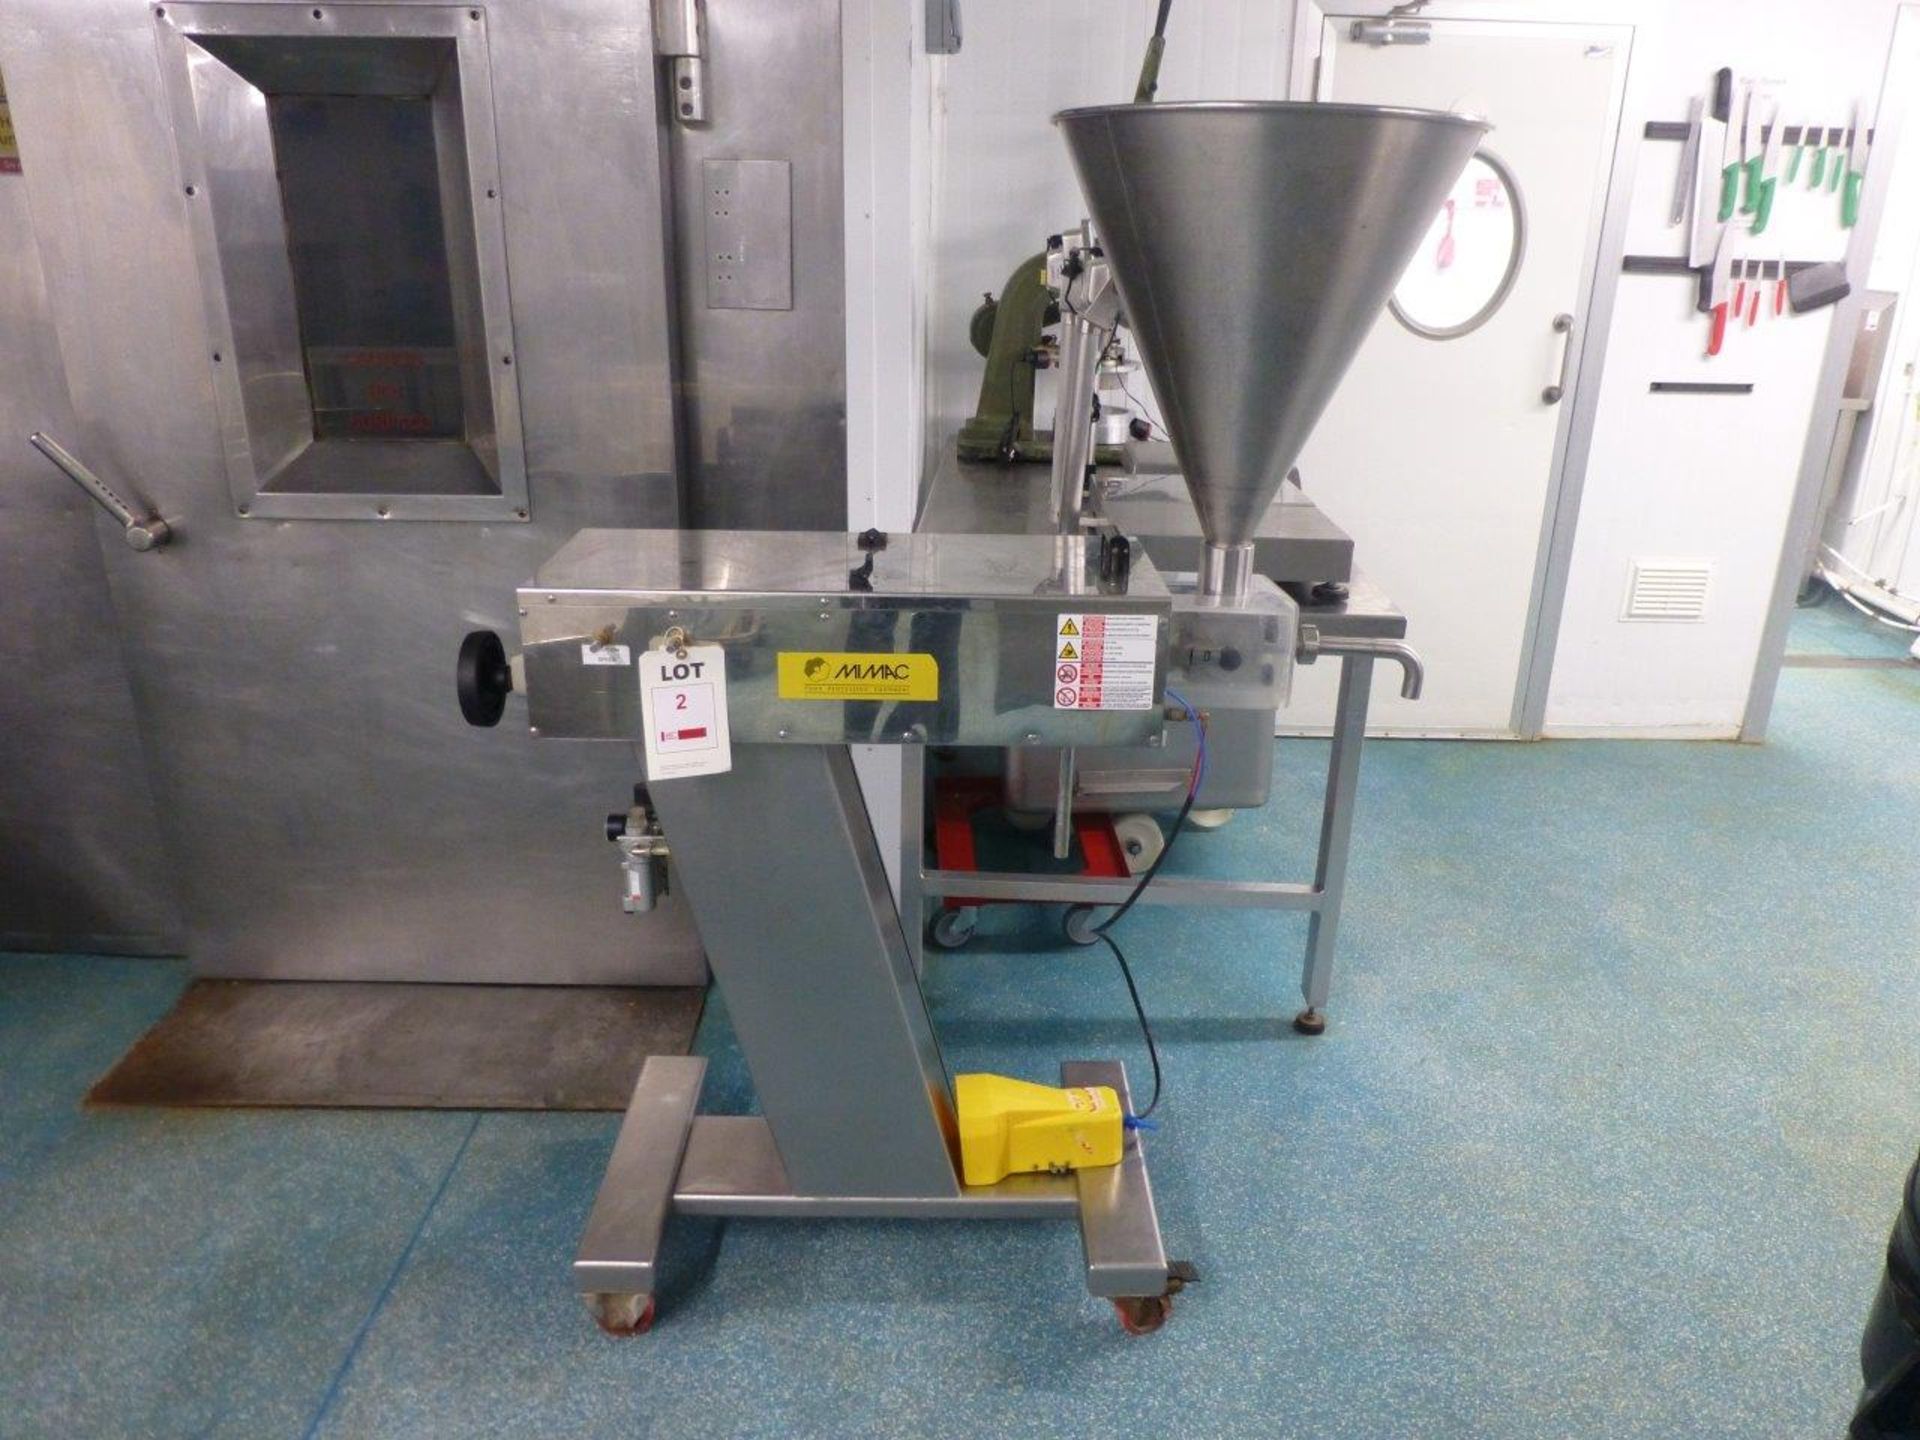 Mimac single head mobile doser with foot operated control